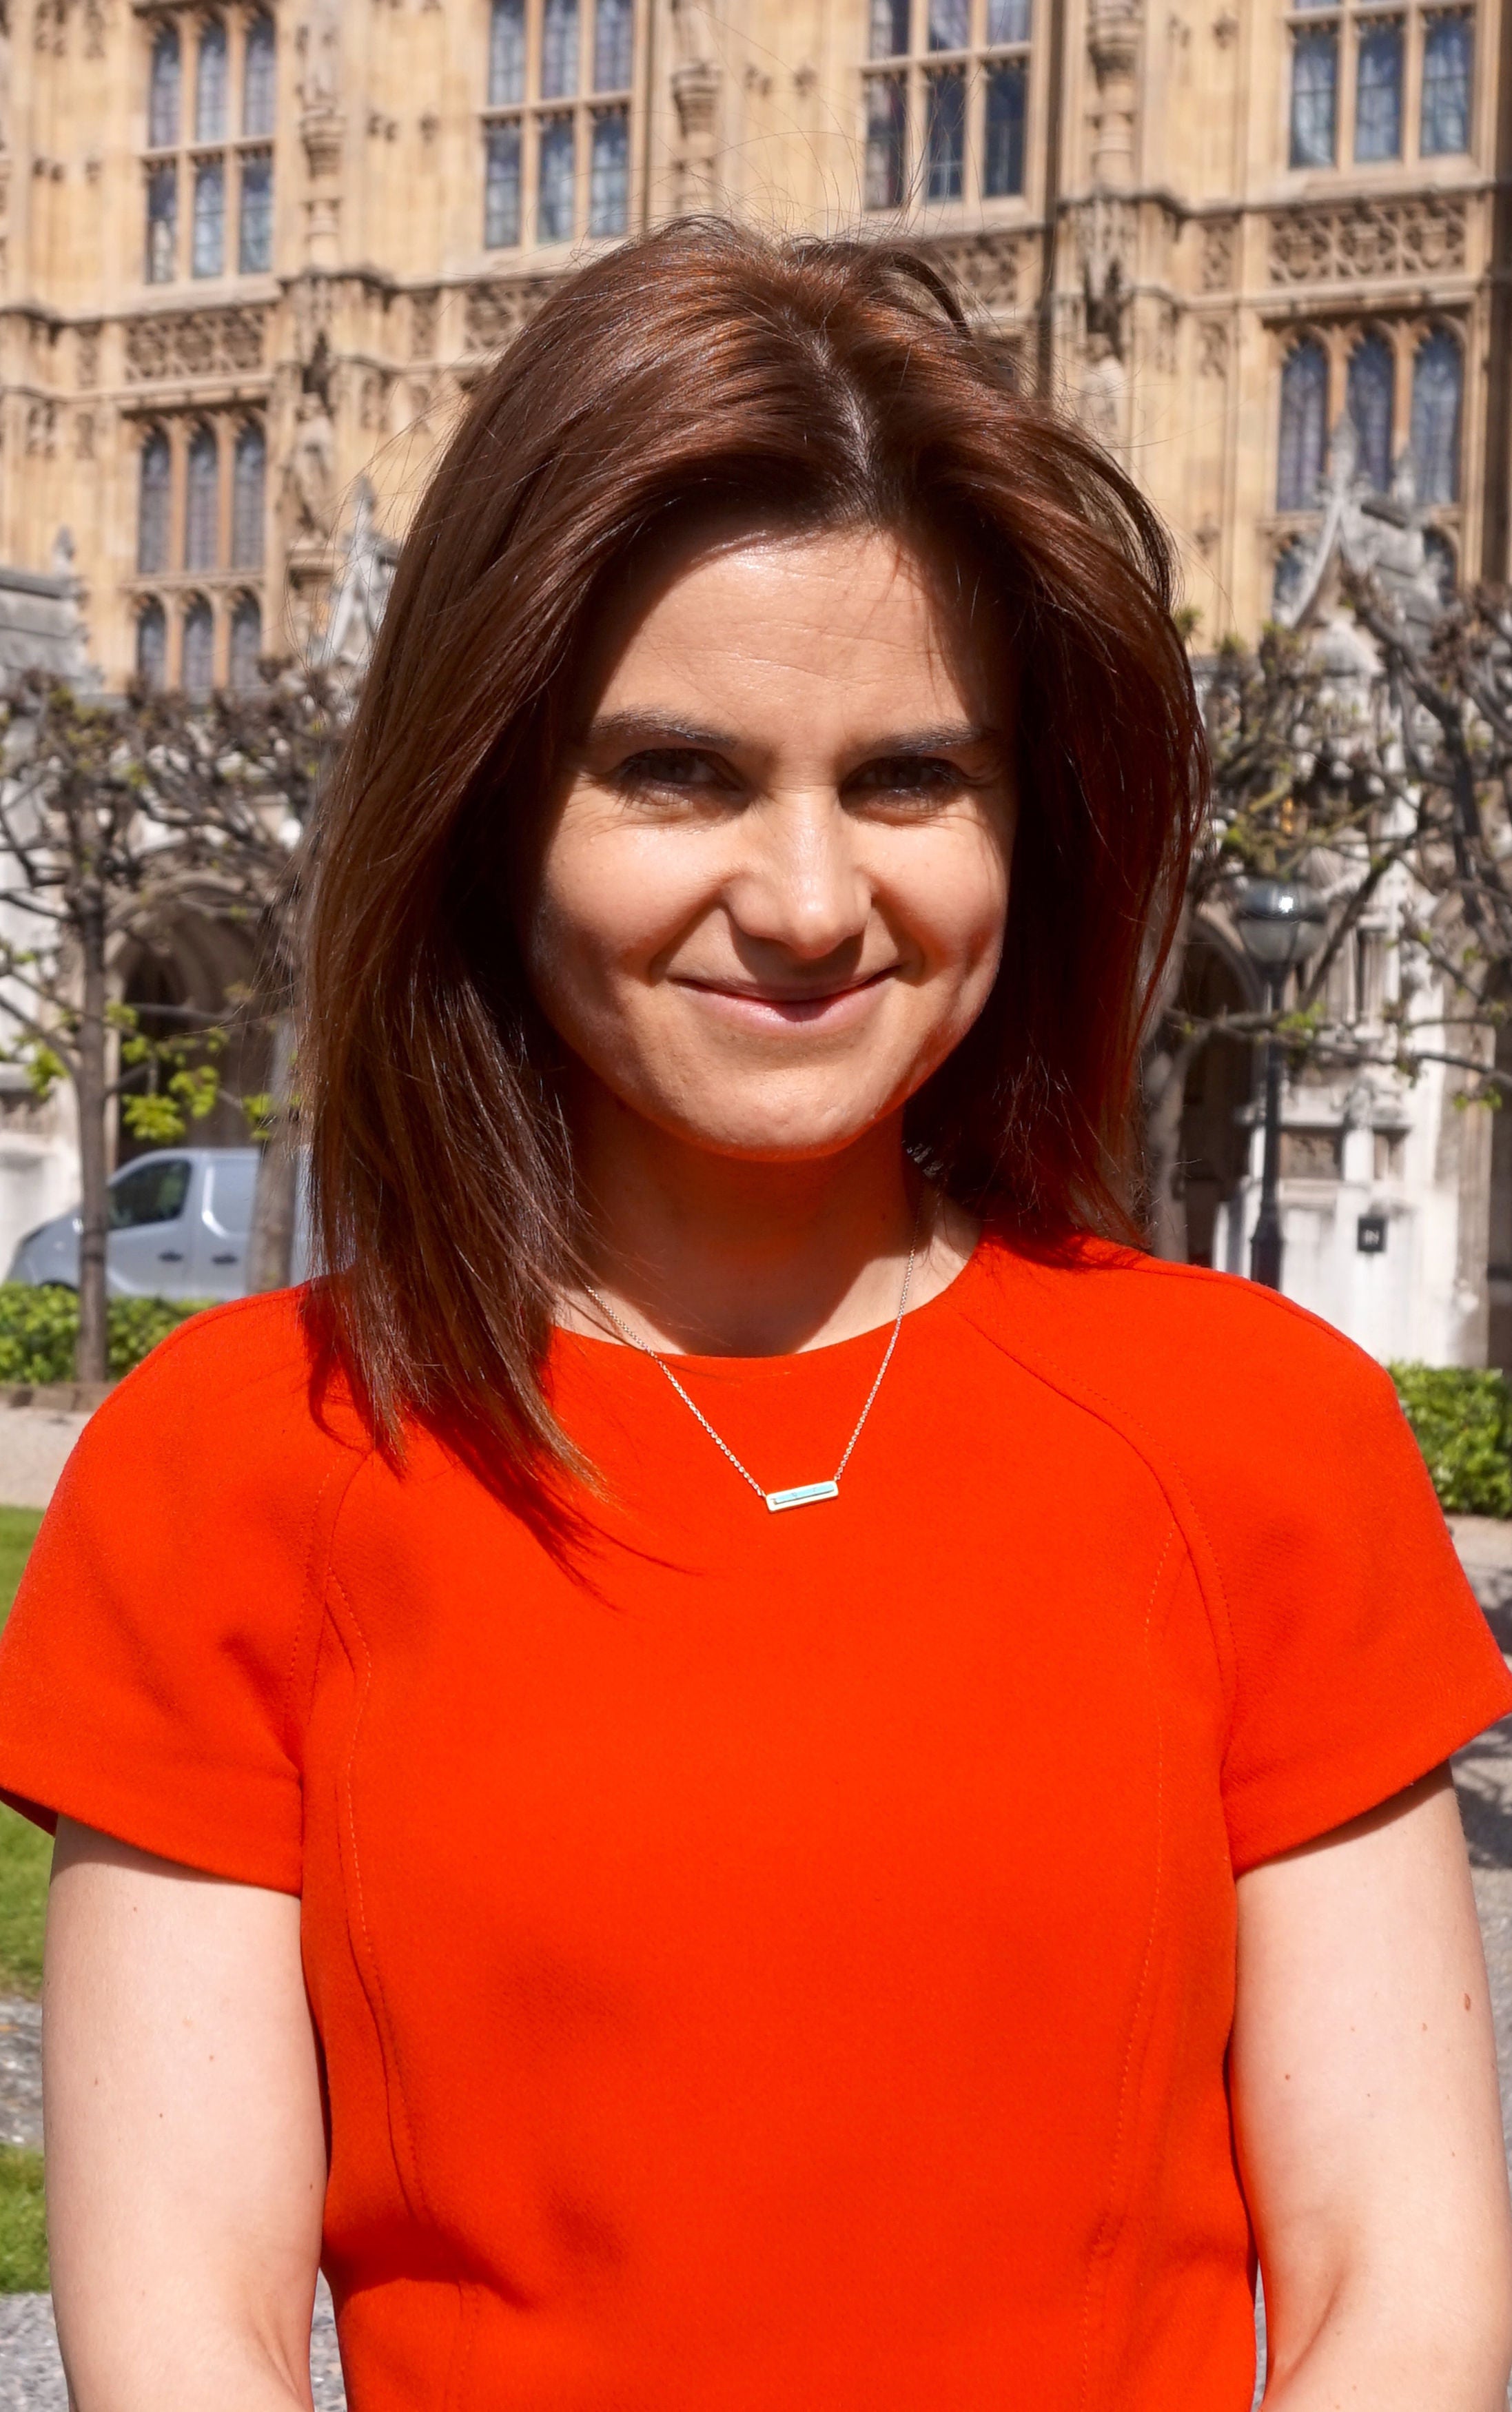 Batley and Spen Labour MP Jo Cox was killed by far-right extremist Thomas Mair in June 2016